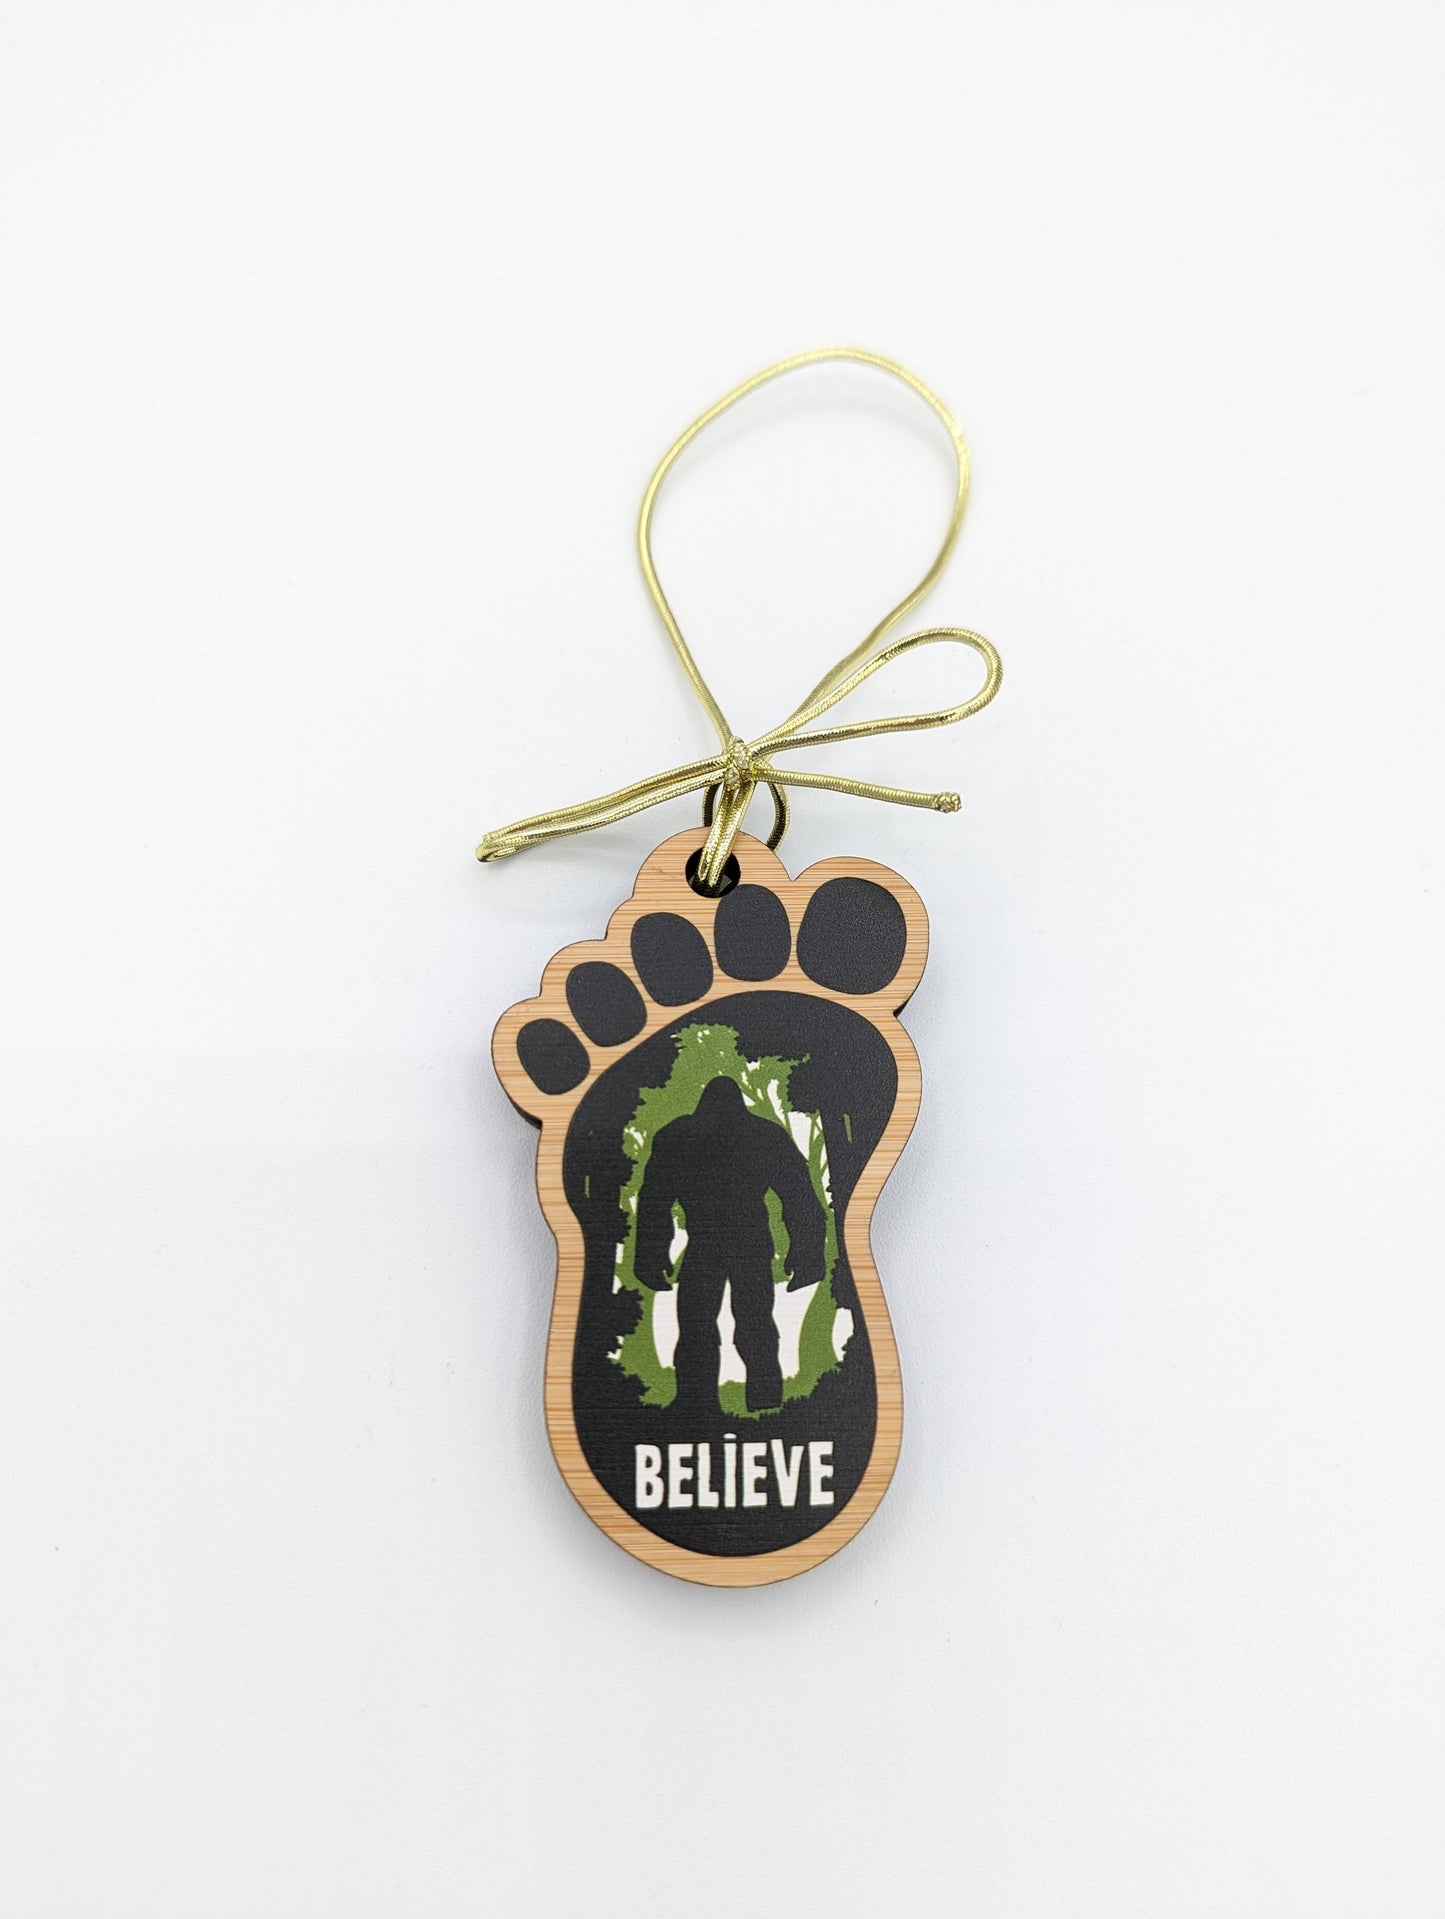 Sustainably Sourced Wood Ornament - Big Foot